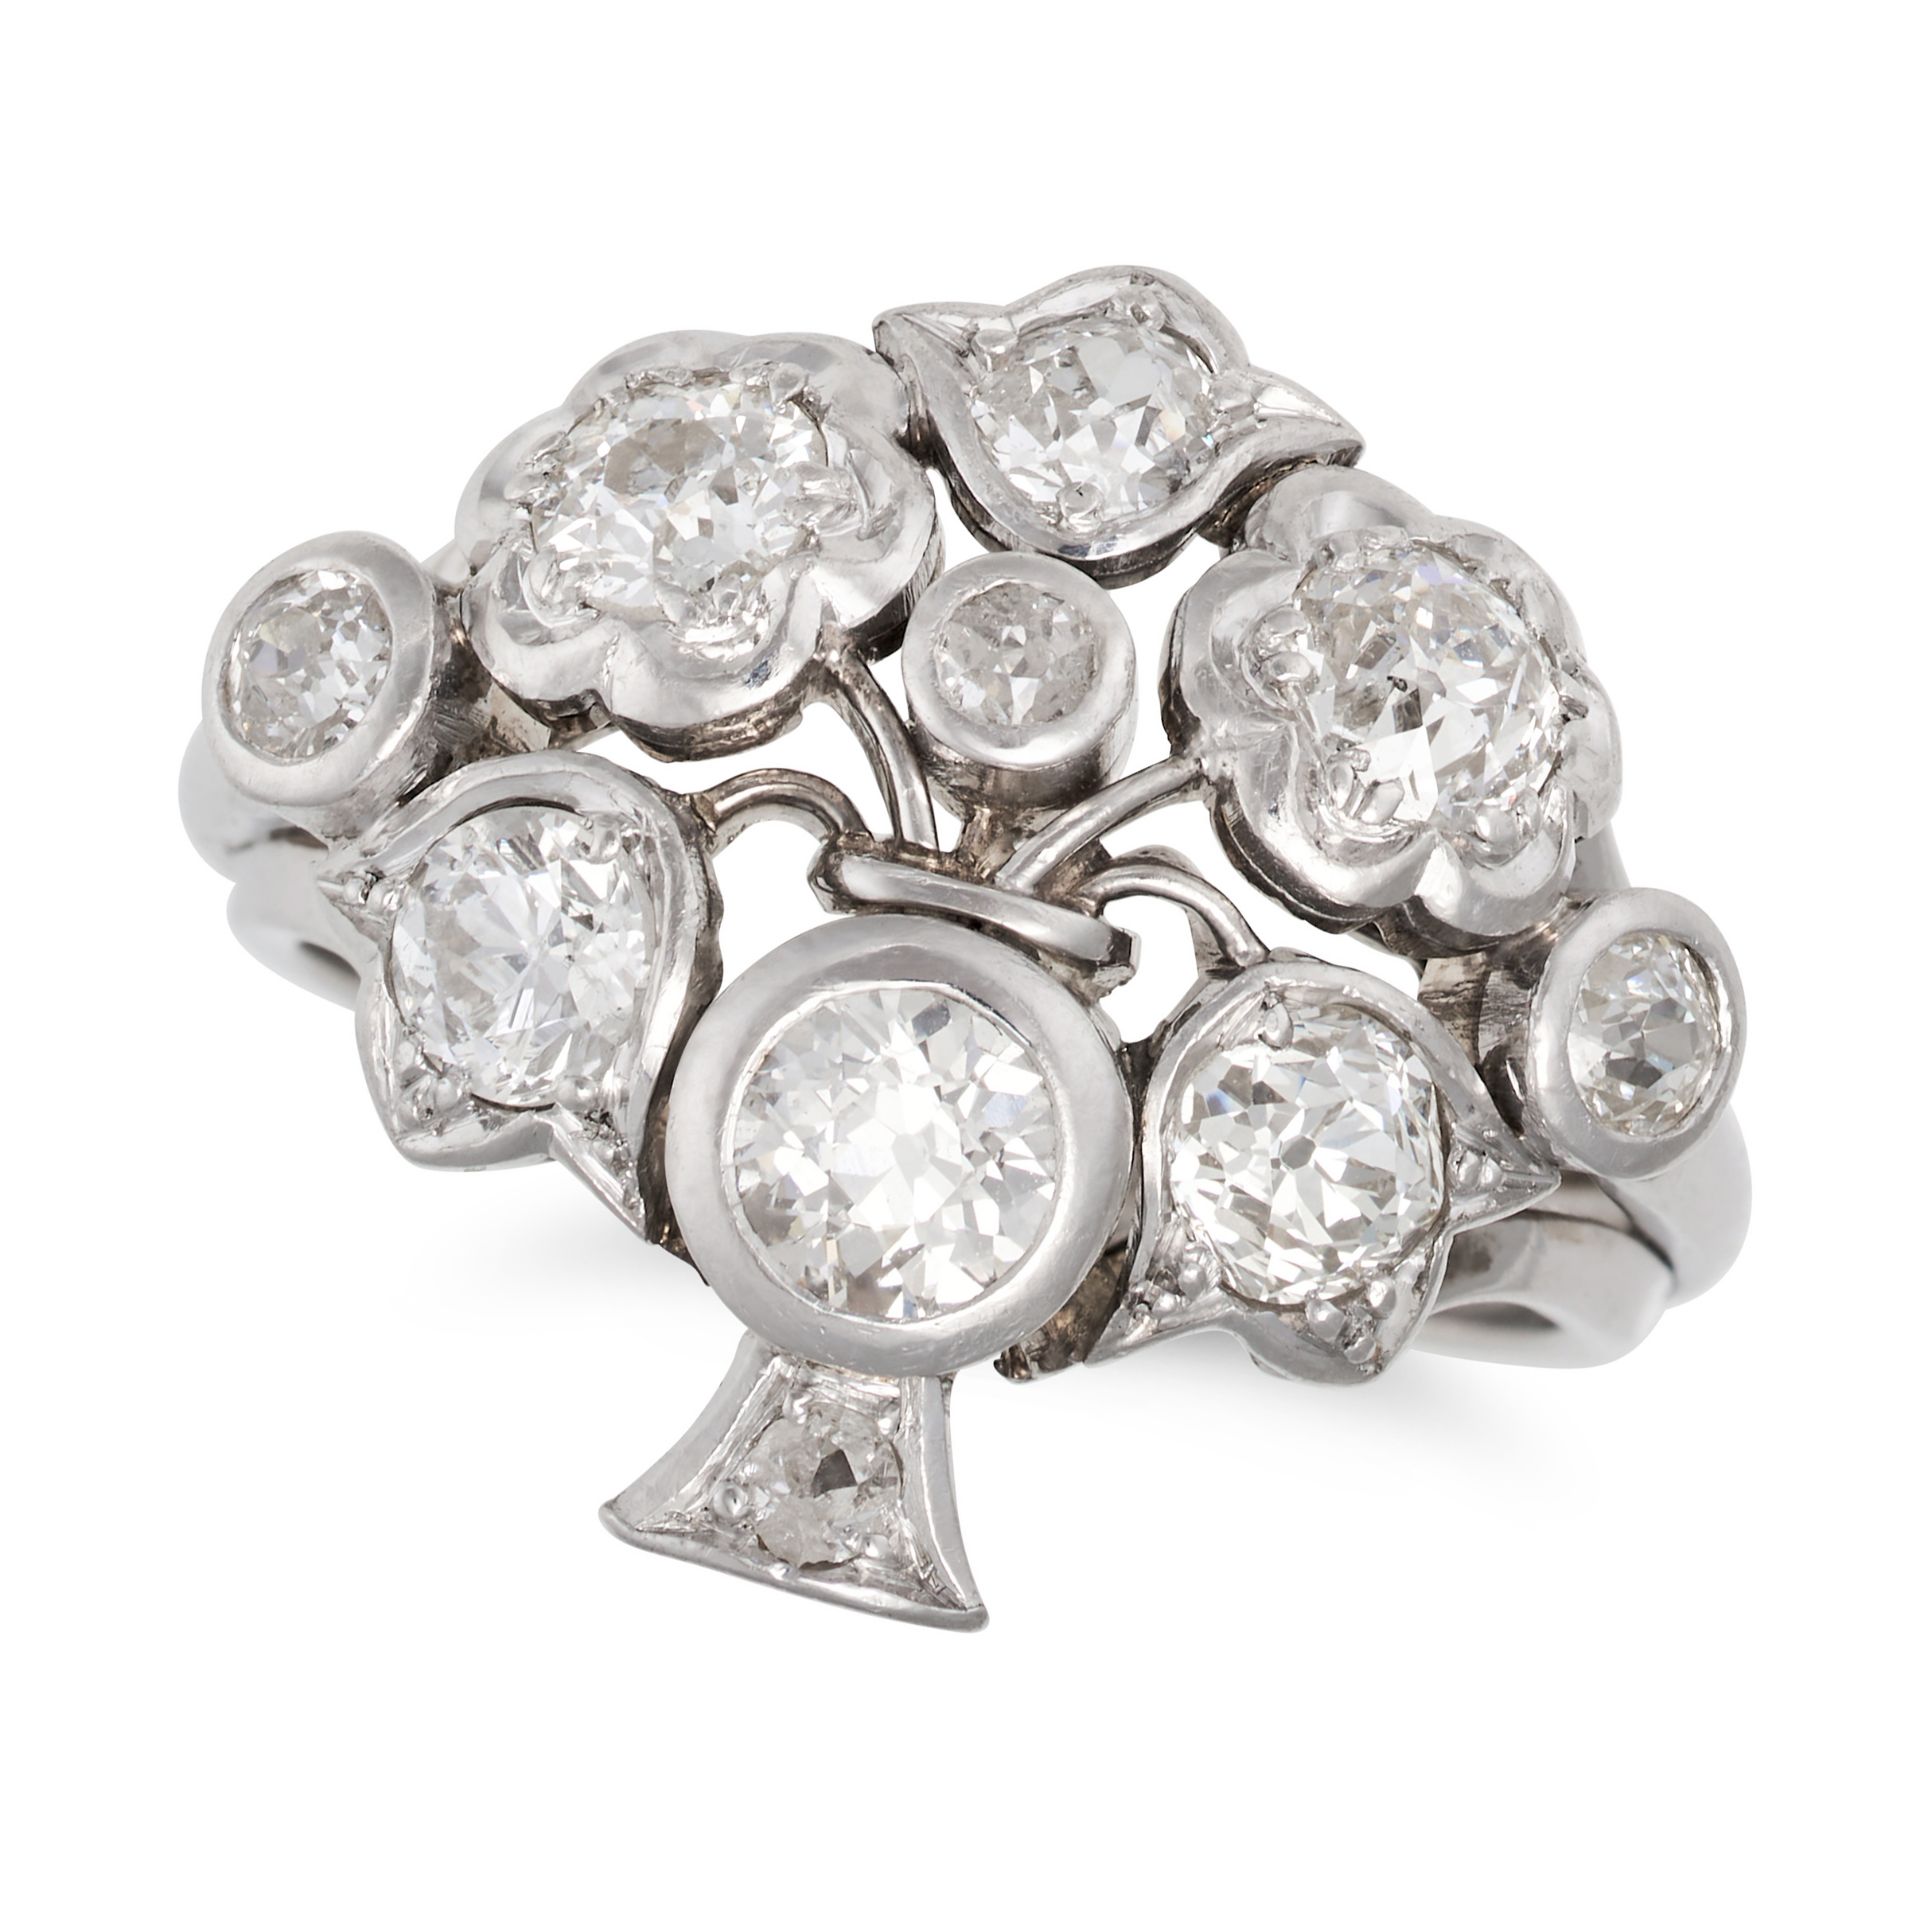 A DIAMOND GIARDINETTO RING in white gold, designed as a bouquet of flowers in a vase, set through...